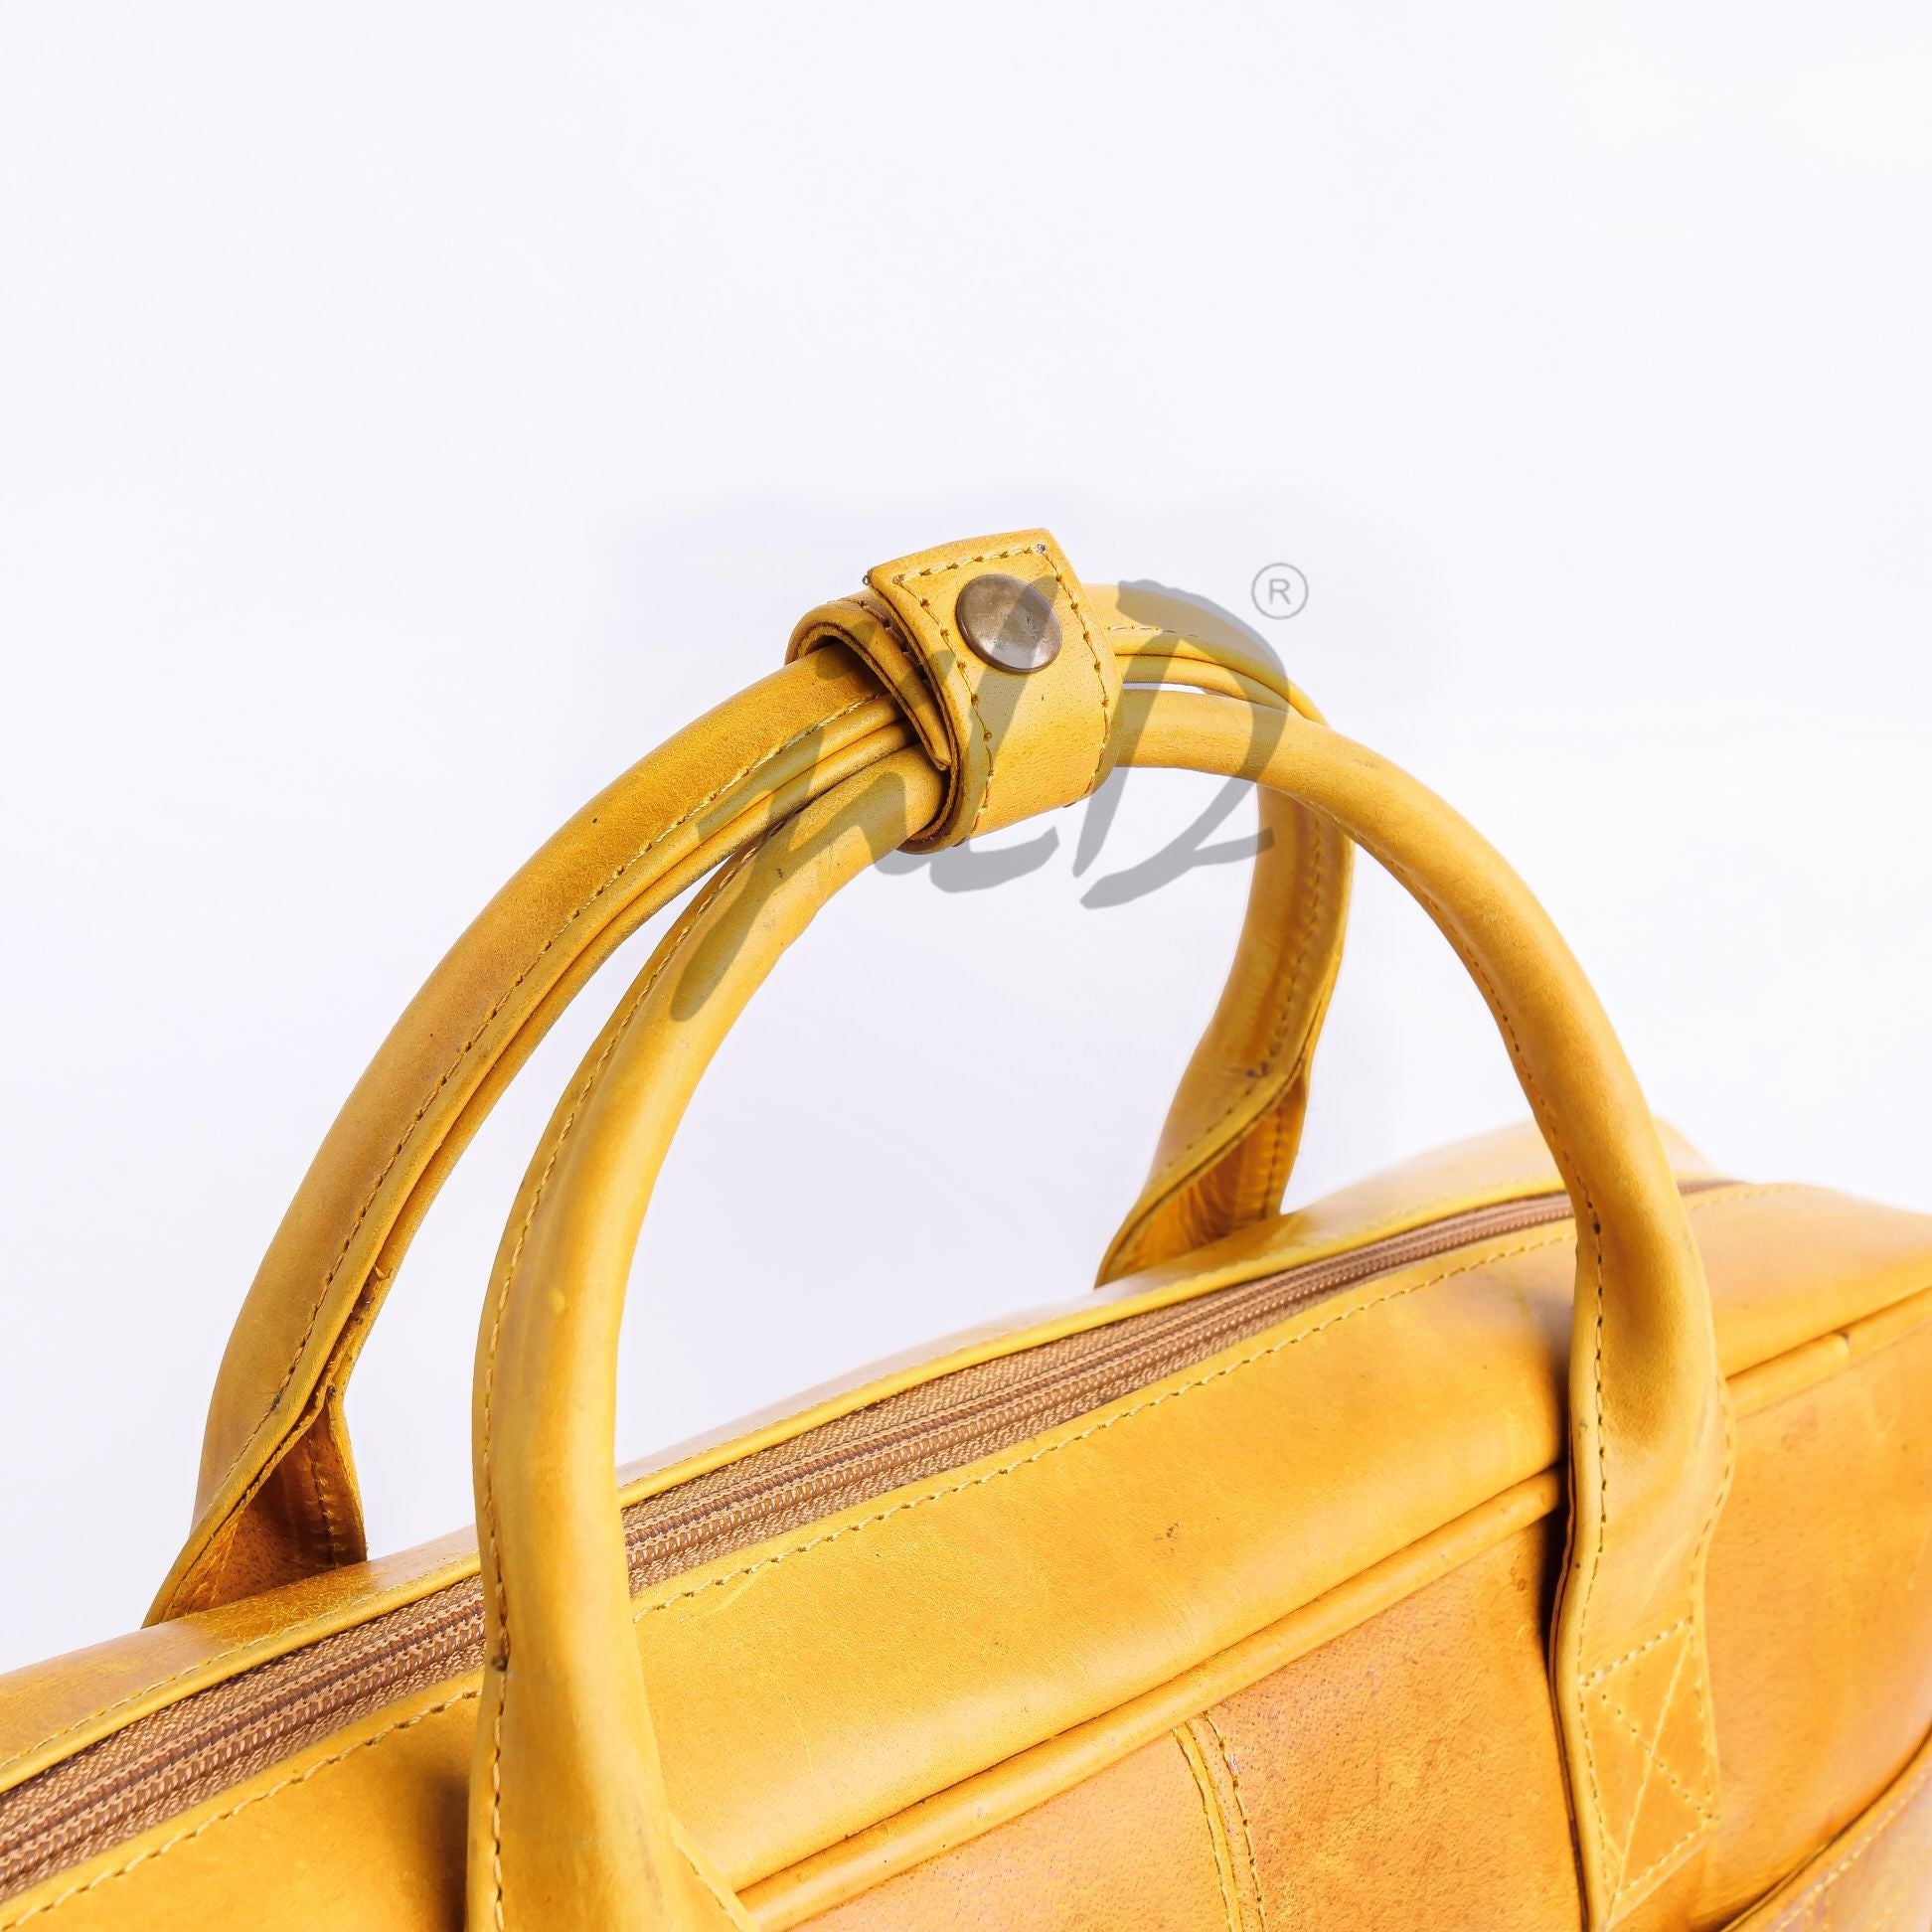 Everyday Companion Leather Laptop Bag - Camel Brown